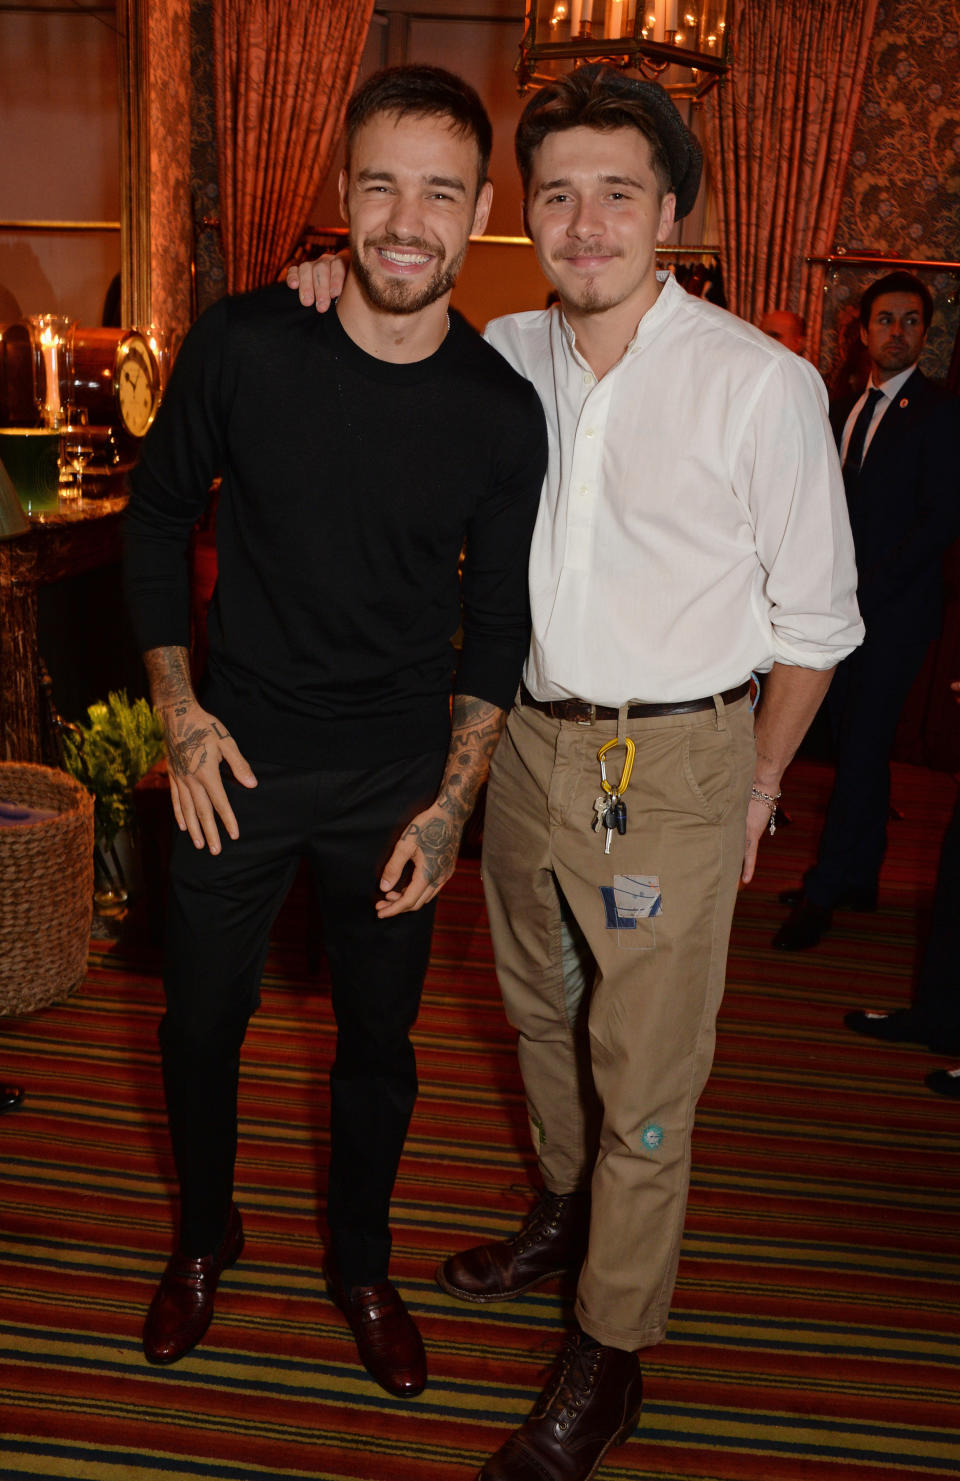 LFW: Liam Payne and Brooklyn Beckham at the Victoria Beckham 10th anniversary party